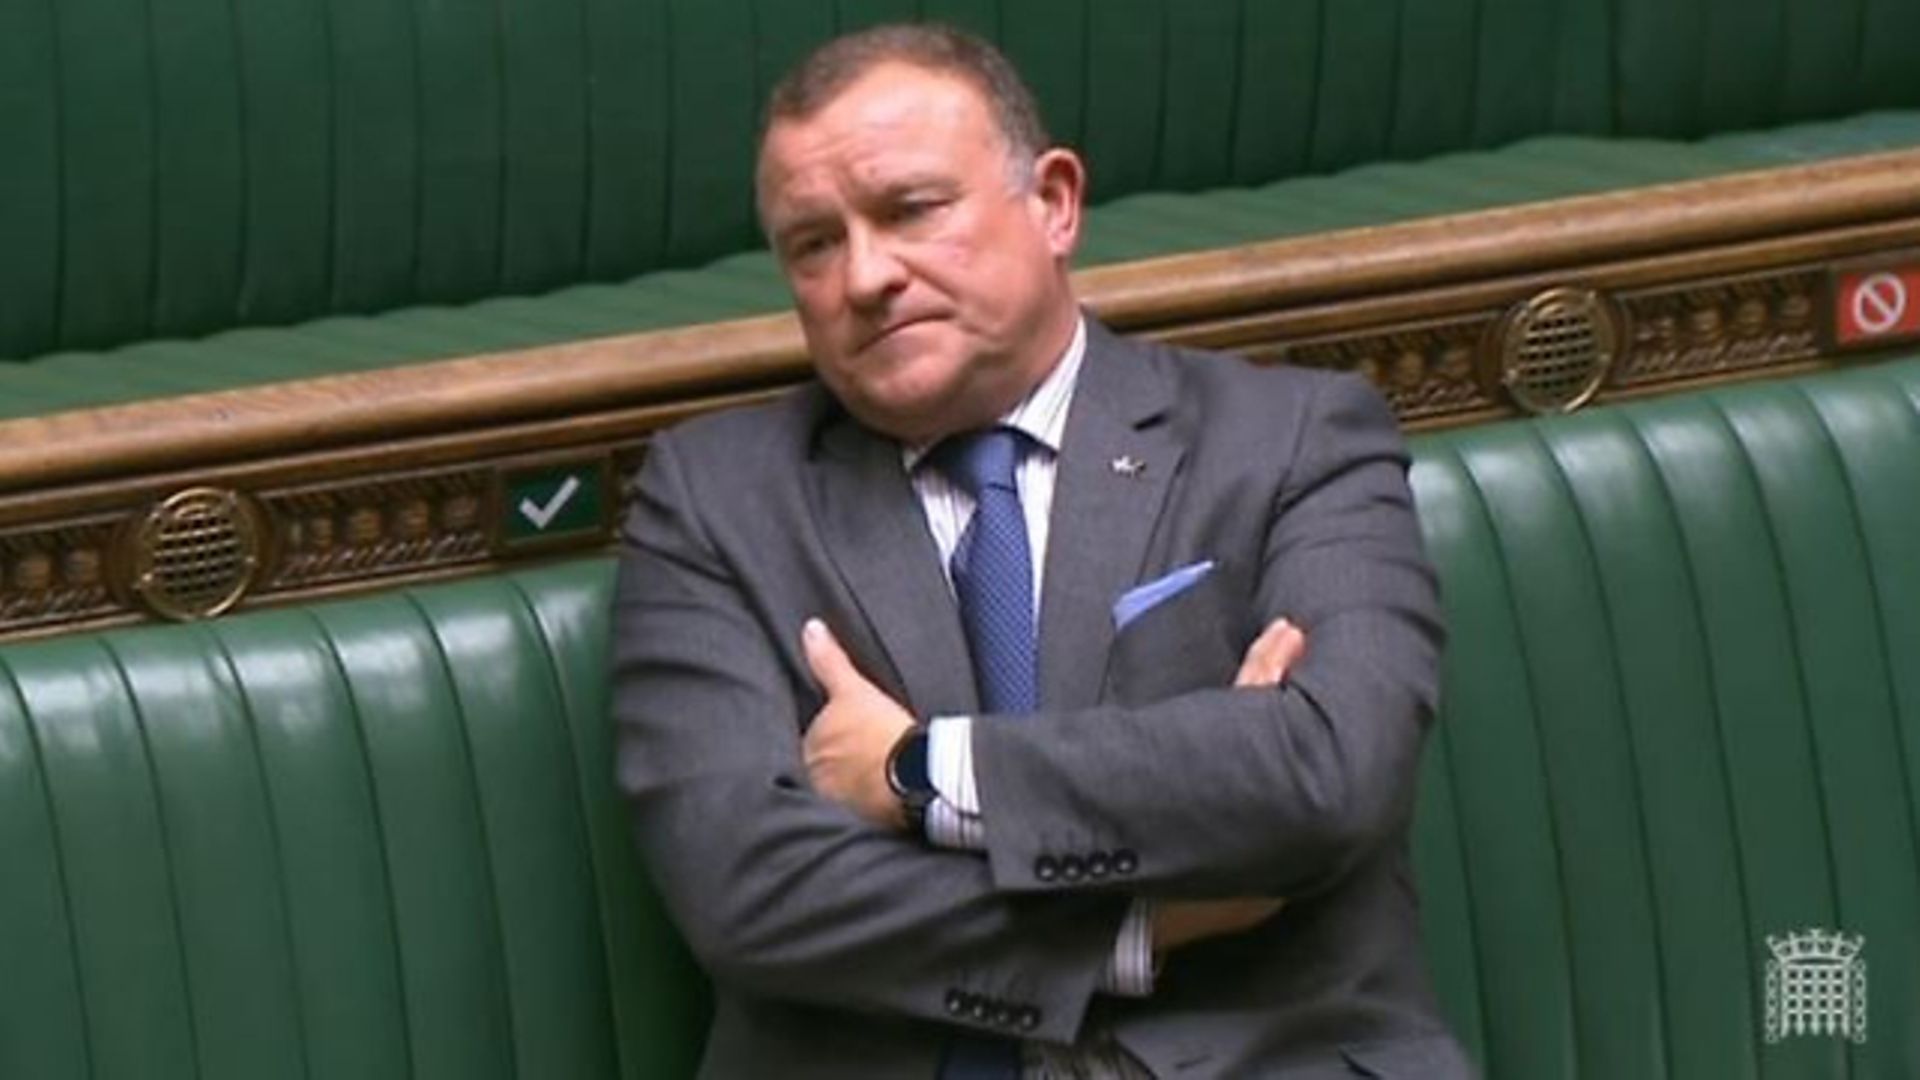 SNP MP Drew Hendry has been suspended from the House of Commons after refusing to sit down and stop shouting during a Brexit debate. - Credit: PA